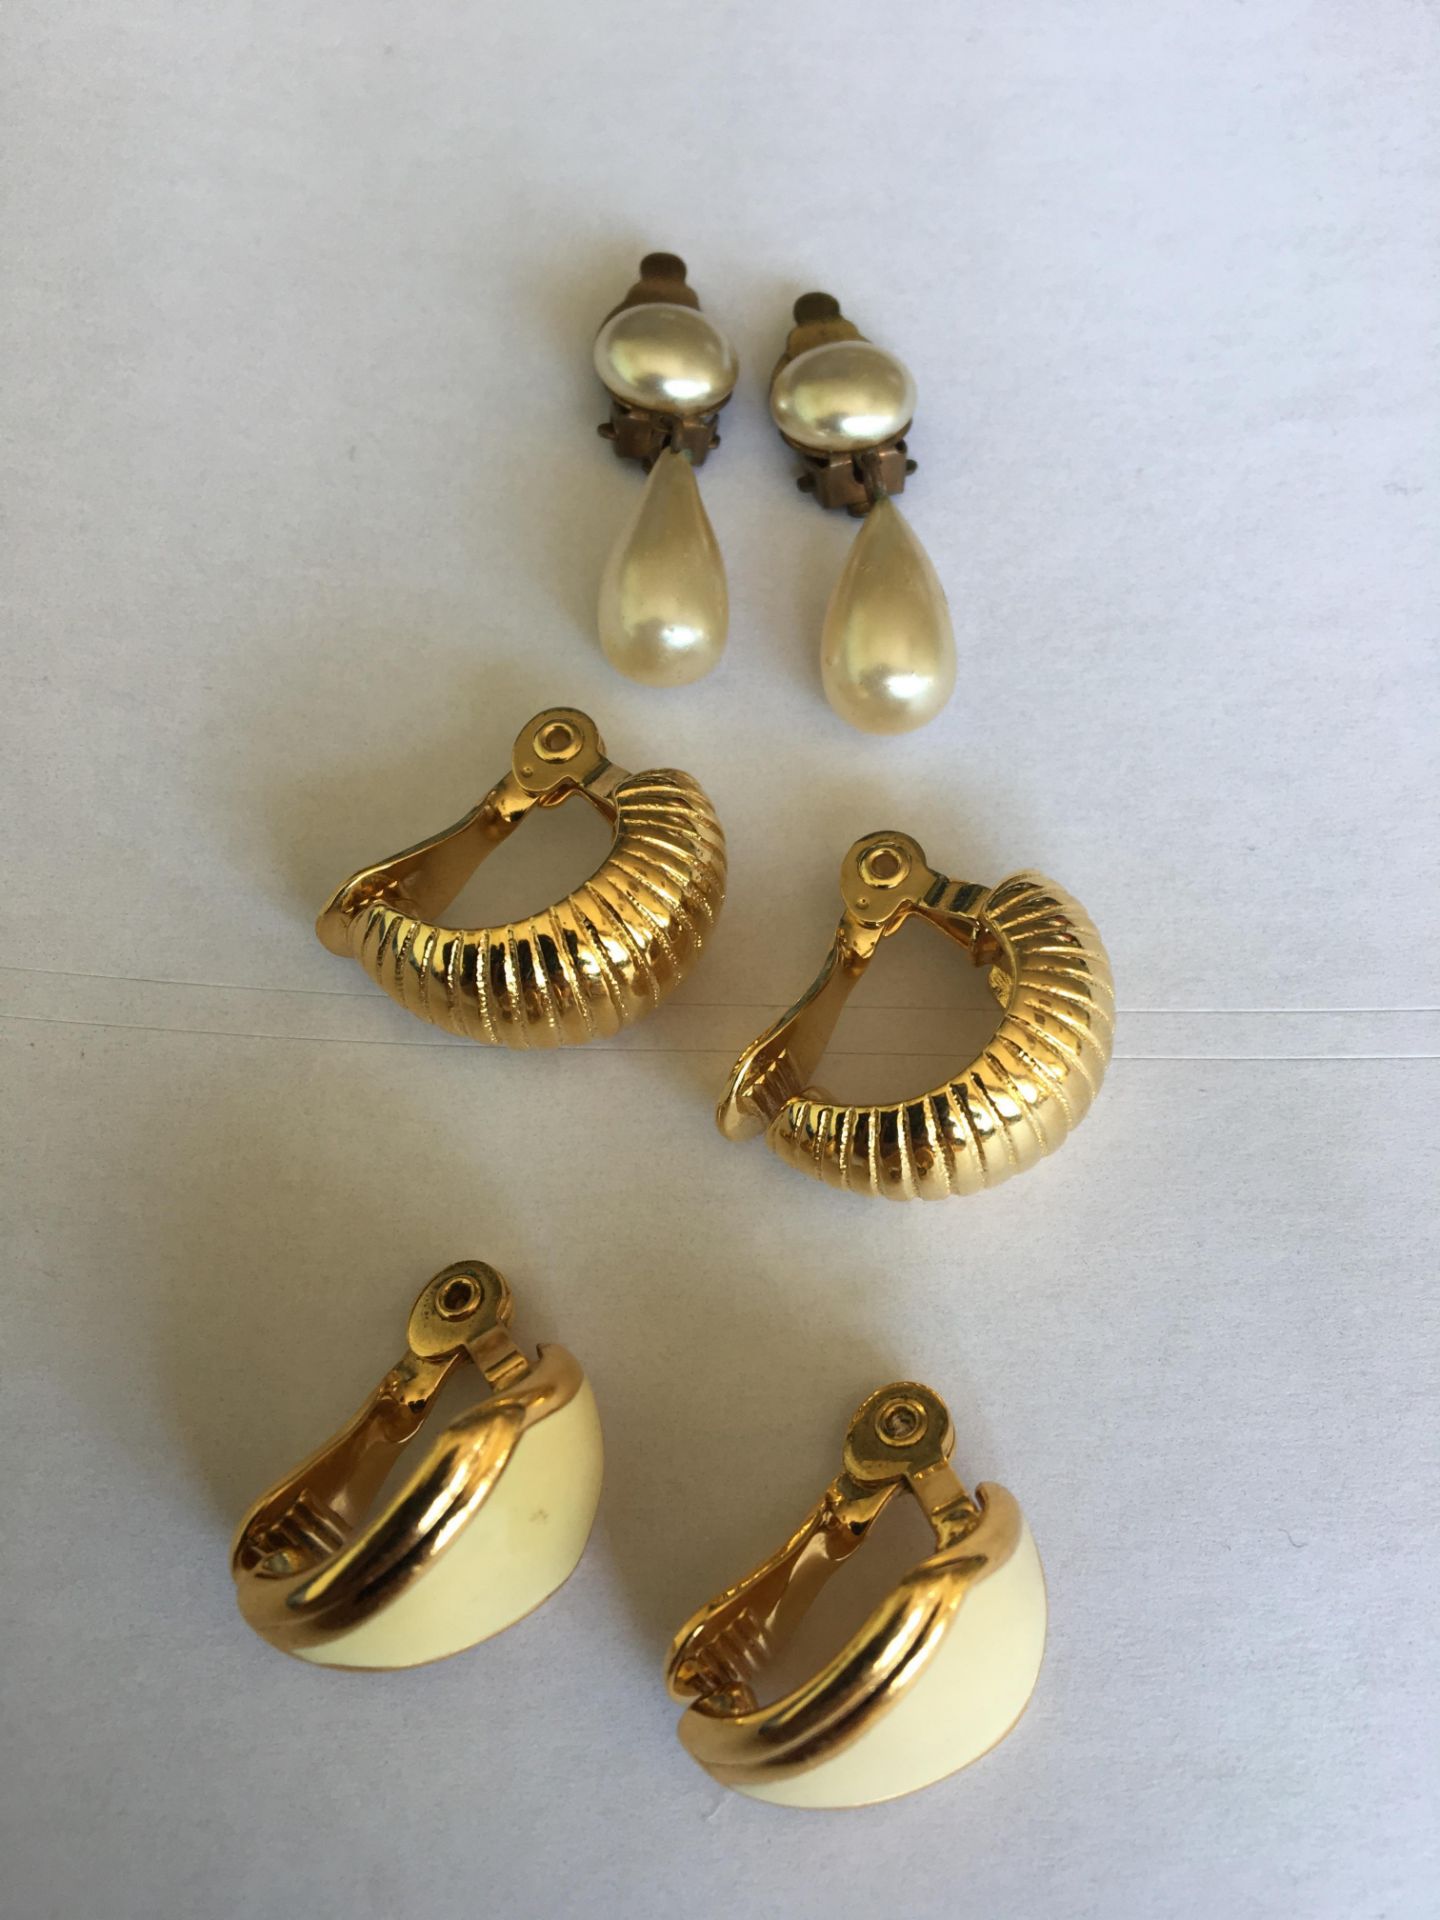 GOOD SELECTION OF VINTAGE CLIP ON EARRINGS. ONE FAUX PEARL DROP AND THE OTHER TWO SIGNED MONET. FREE